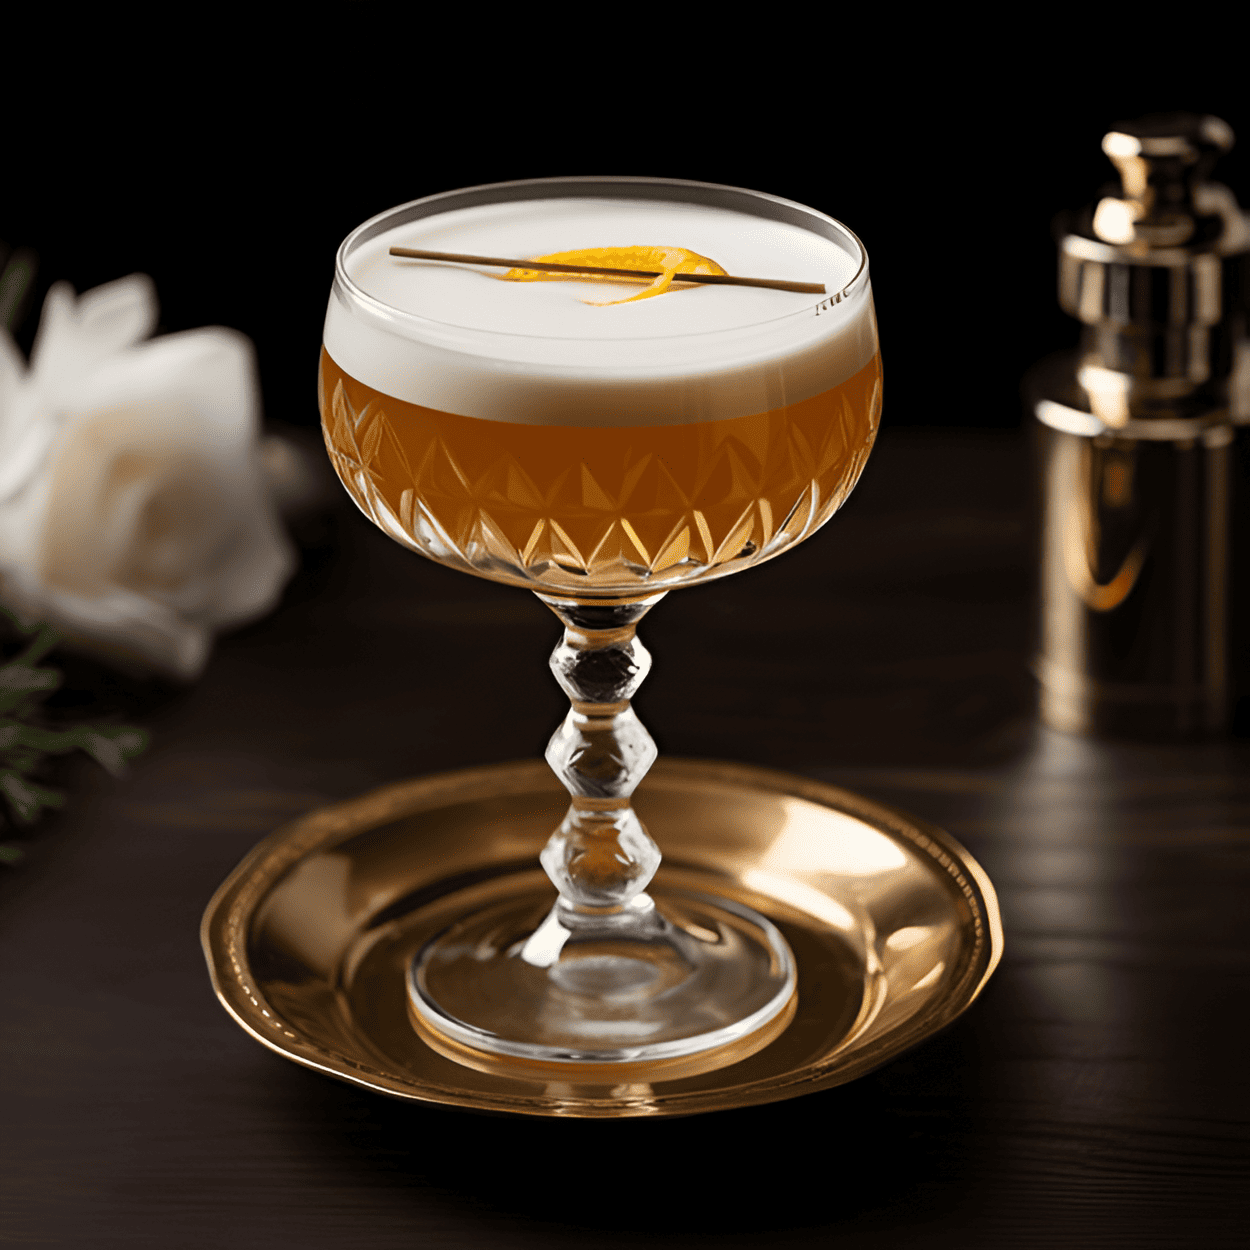 Nikolashka Cocktail Recipe - The Nikolashka cocktail has a complex and sophisticated taste, combining sweet, sour, and bitter flavors. It is a well-balanced drink with a smooth, velvety texture and a warming sensation from the cognac.